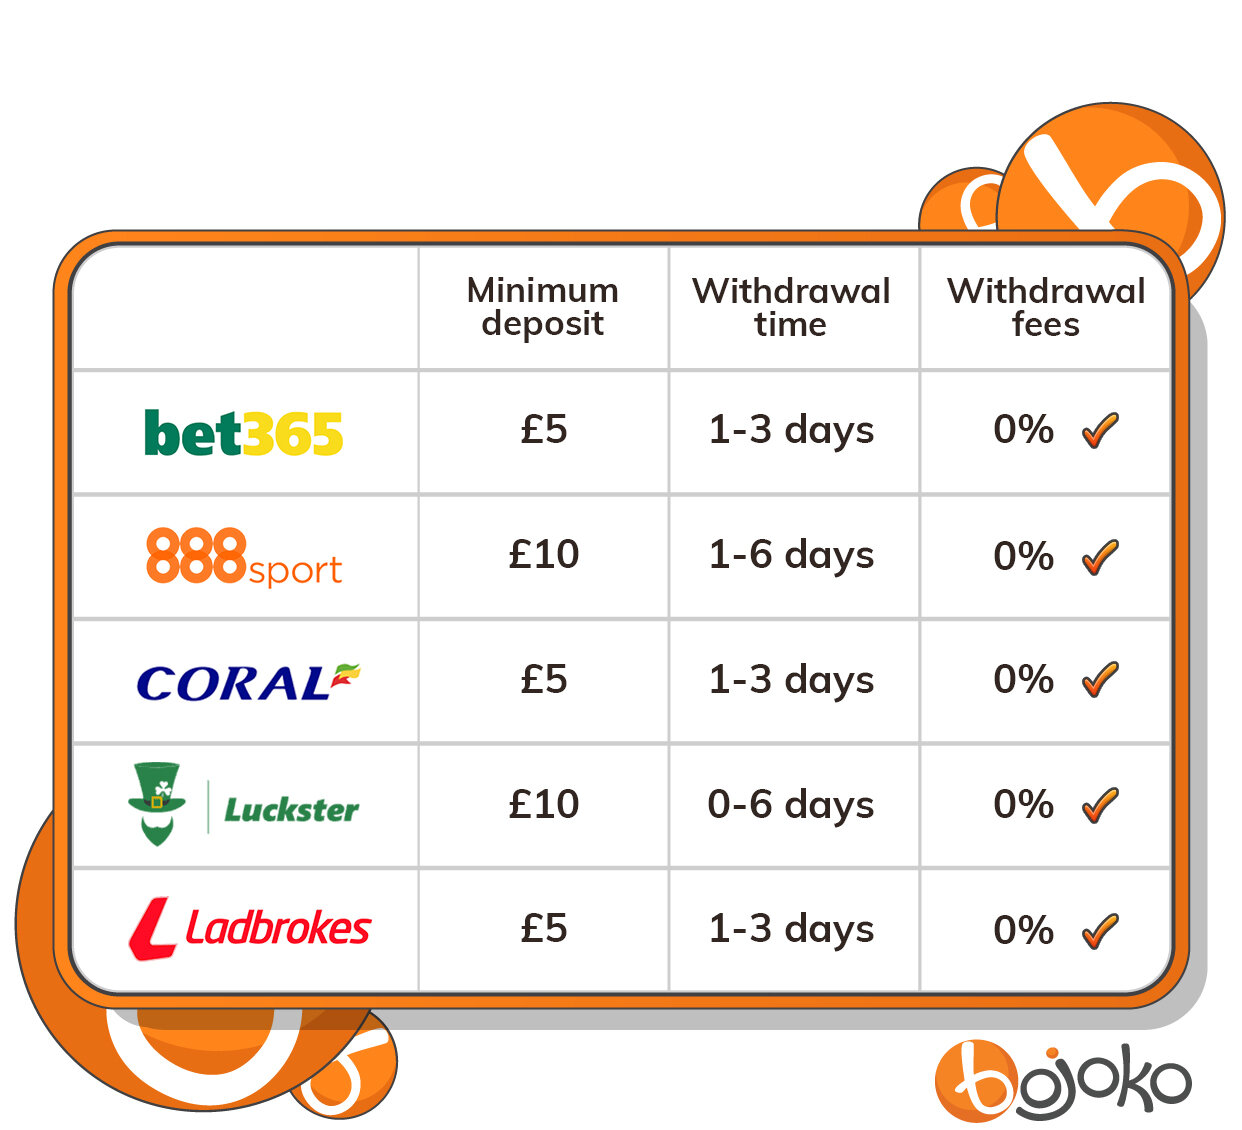 Paysafecard bookmakers comparison table